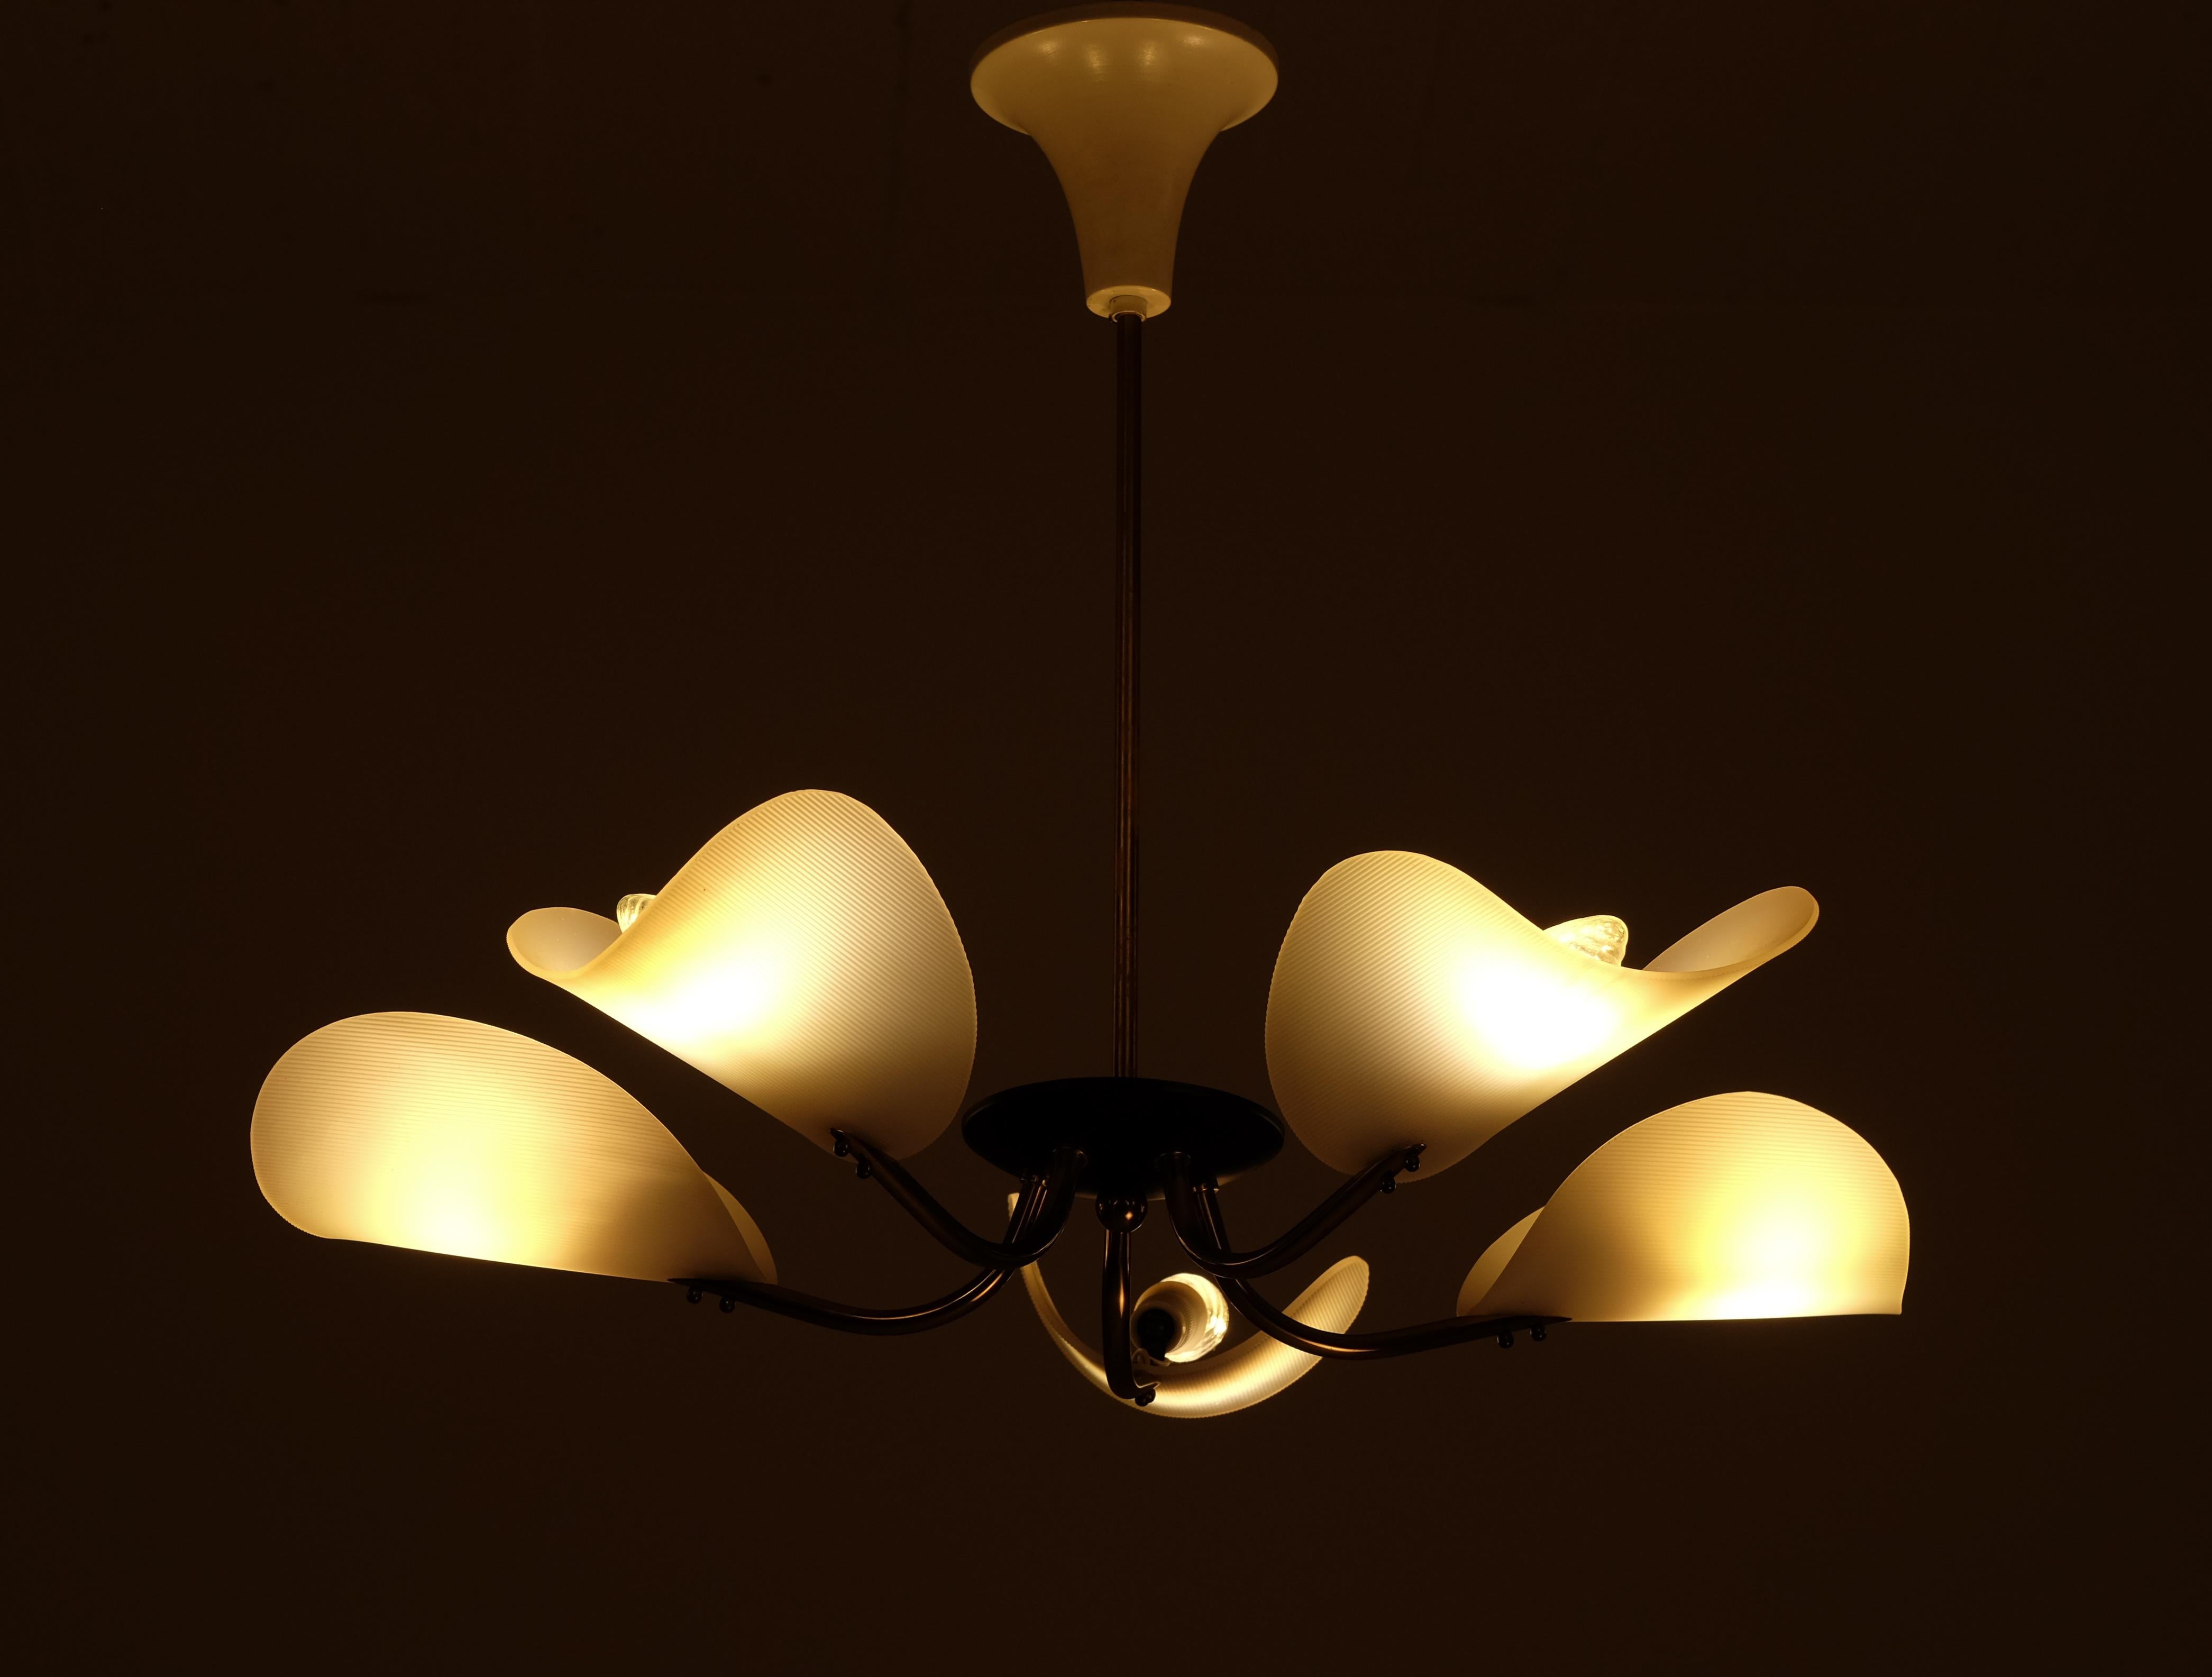 Swedish ceiling light from the 1960s with acrylic shades and brass details.
Diameter: 64 cm